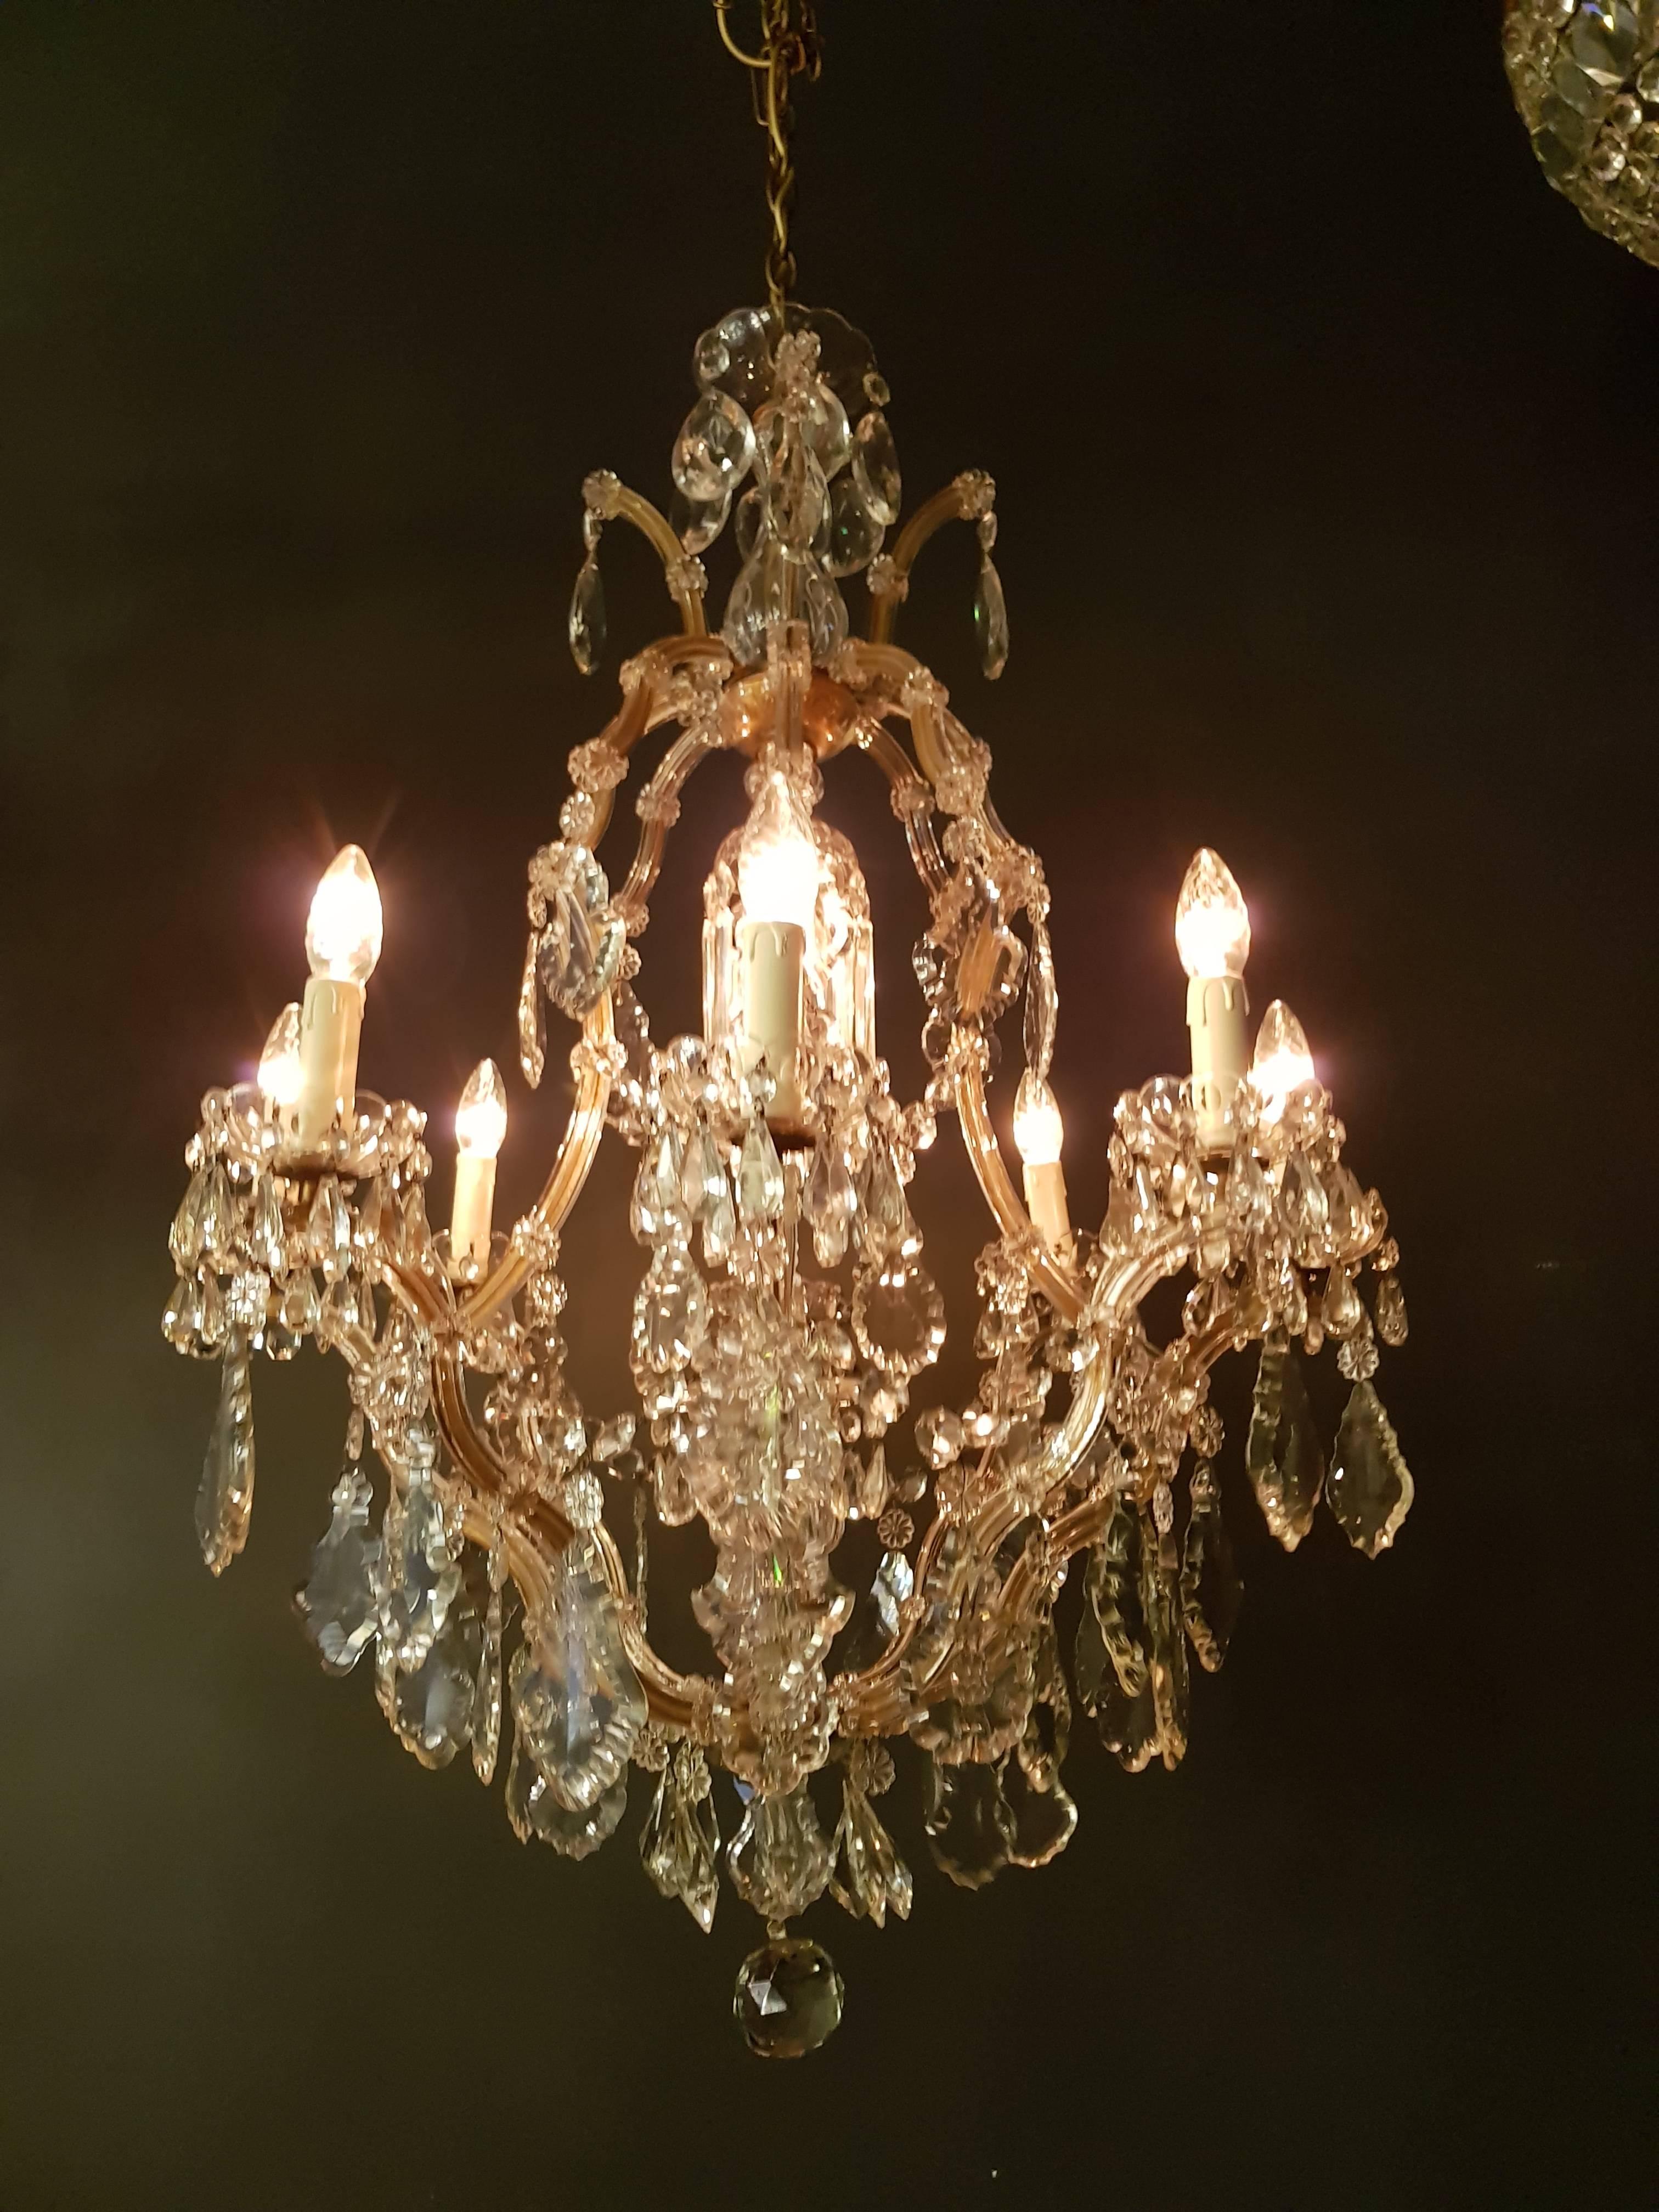 Maria Theresa from Austria glass coated brass
Total height: 150 cm, height without chain 100 cm, diameter 70 cm. Weight (approximately): 11kg.

Number of lights: Seven Light bulb sockets: eight x E14 and one x E27 material: Brass, glass,